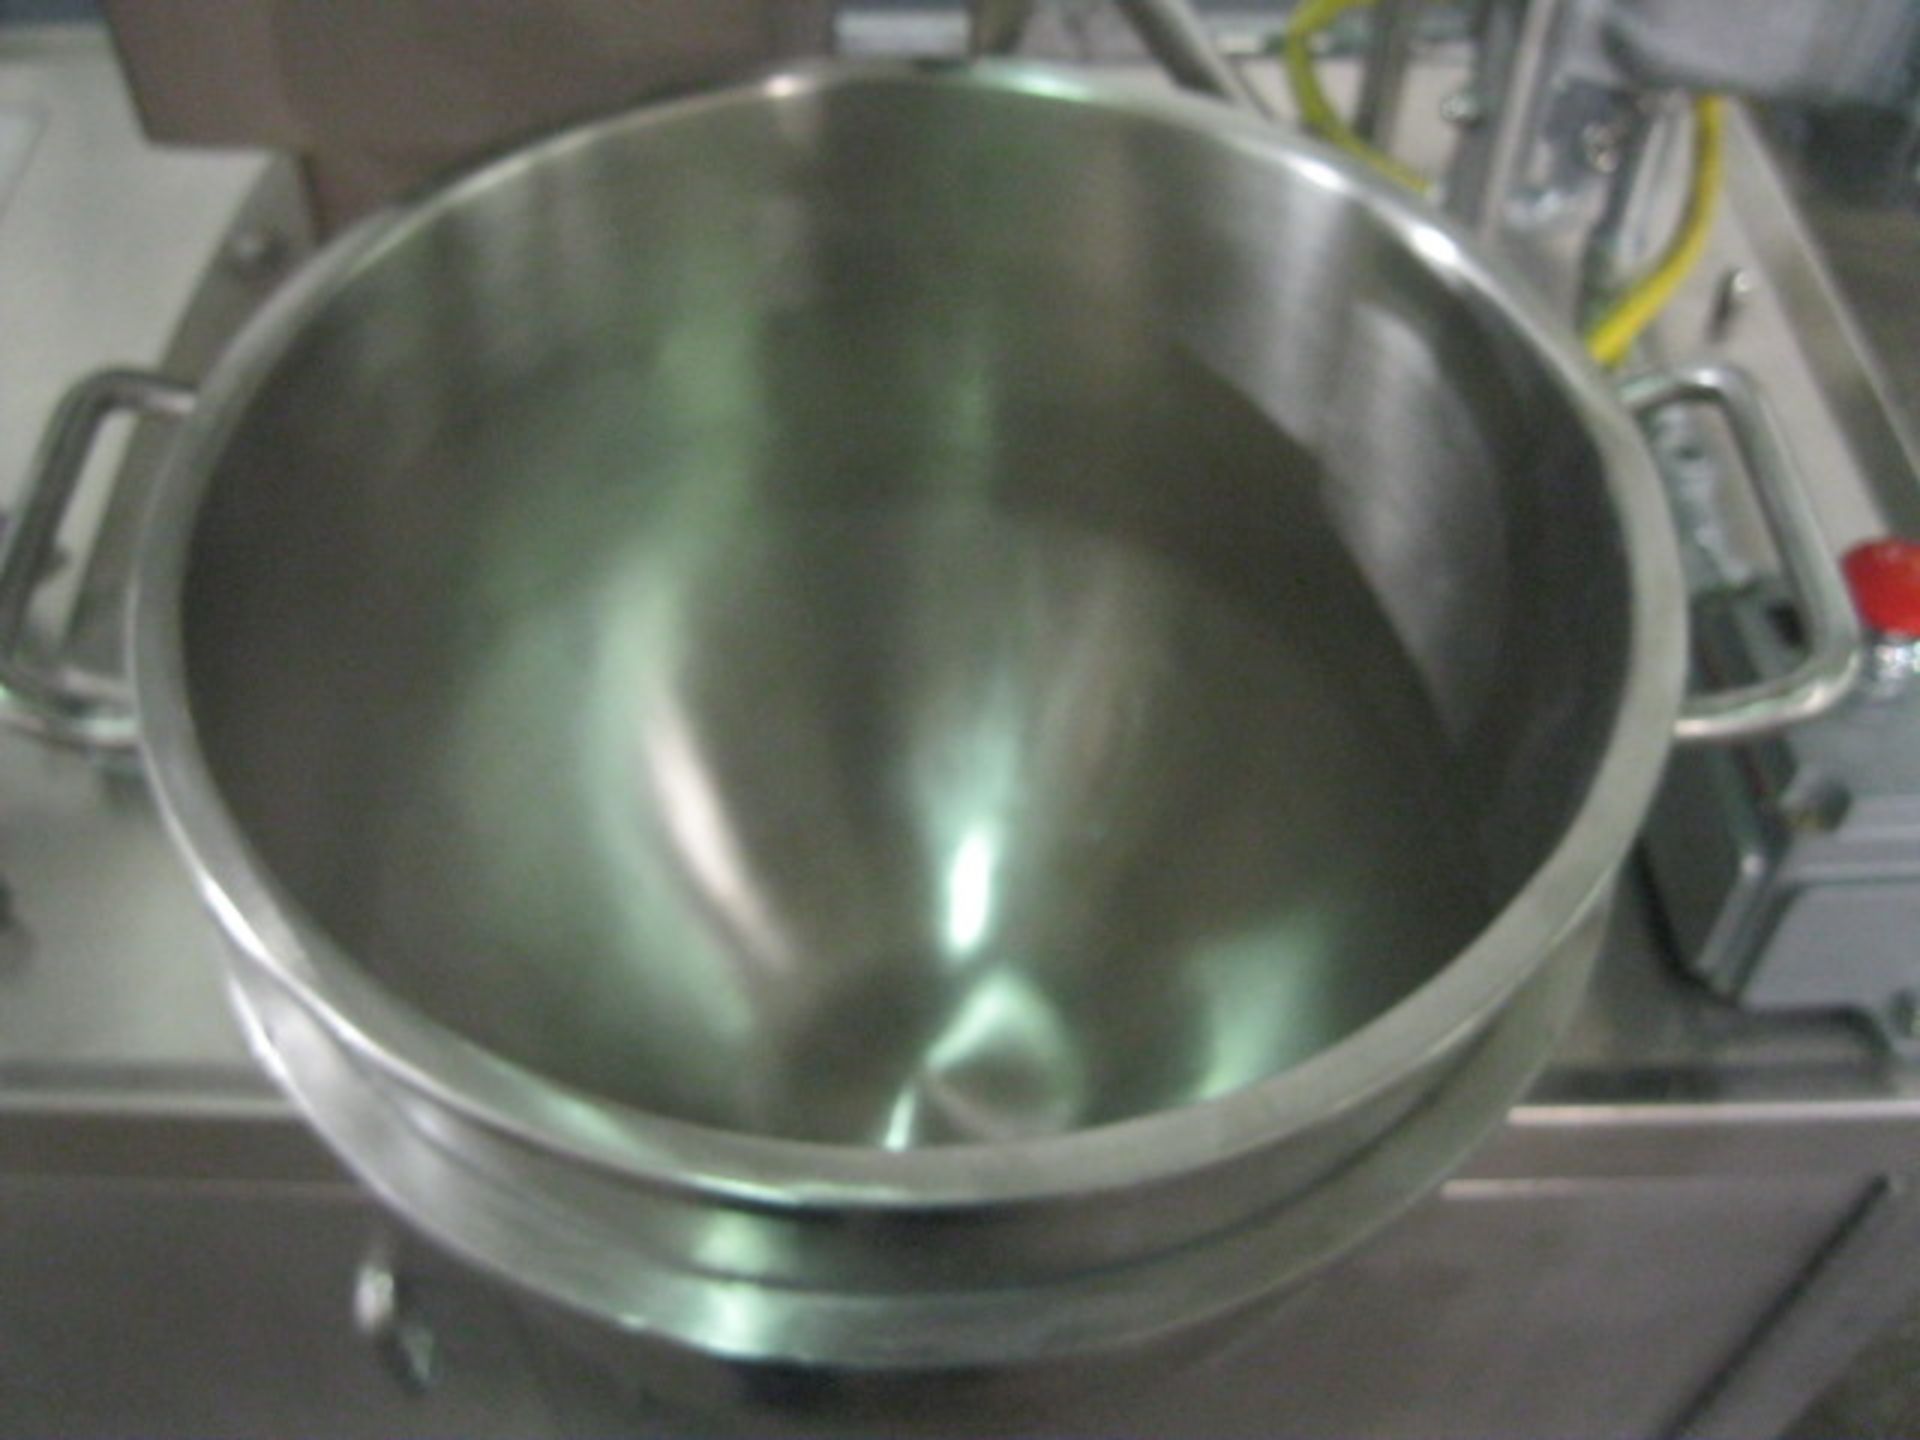 Collette planetary mixer, model MP 20, stainless steel bowl, beater and dust shroud, xp design, - Image 4 of 9